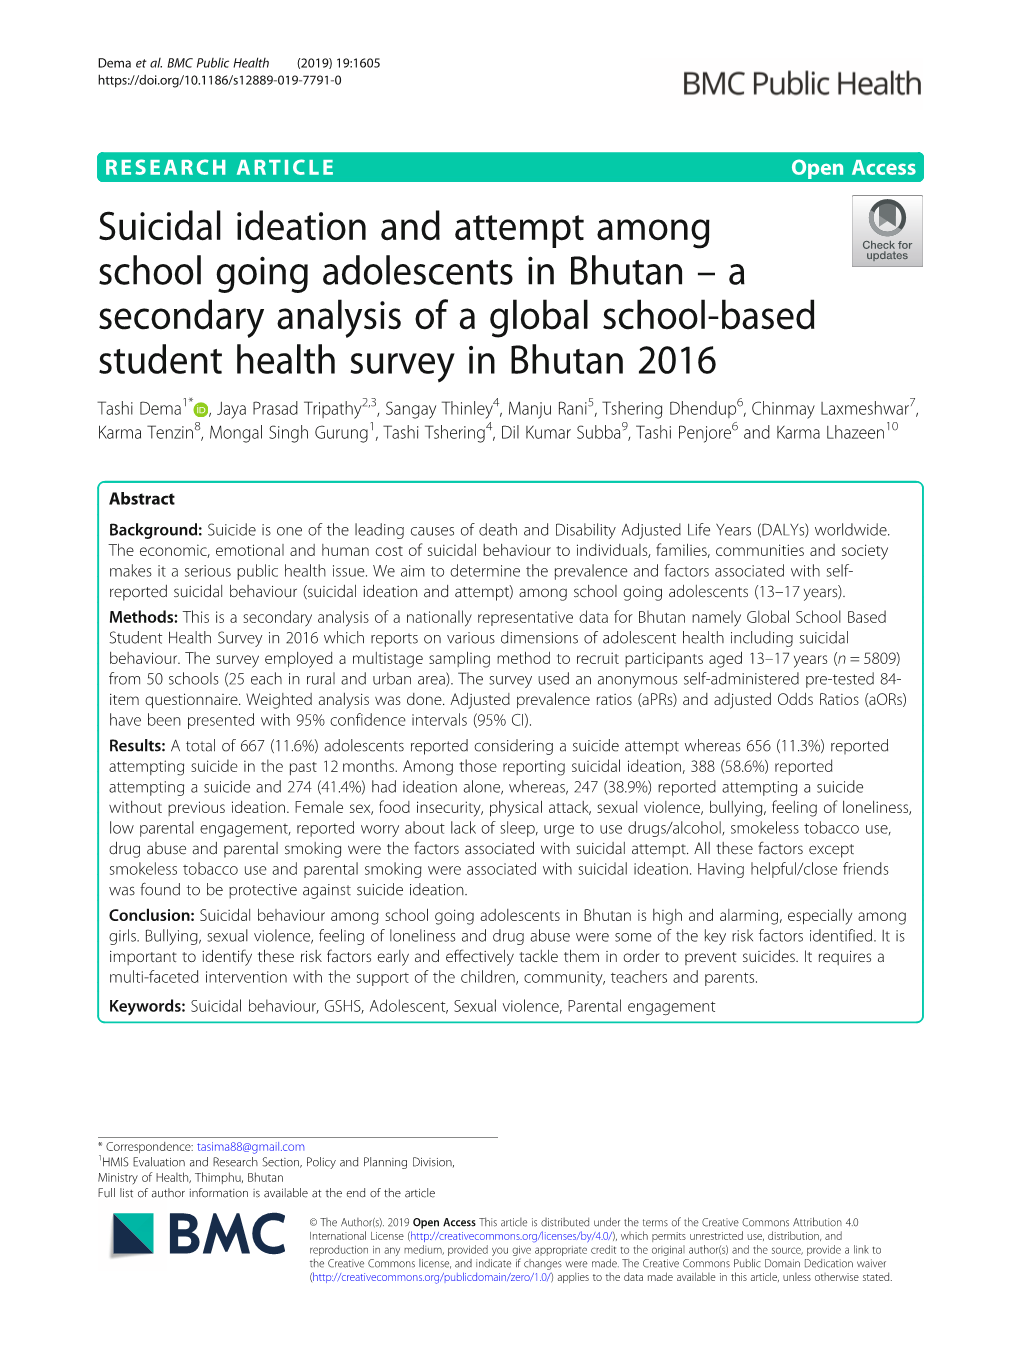 Suicidal Ideation and Attempt Among School Going Adolescents in Bhutan